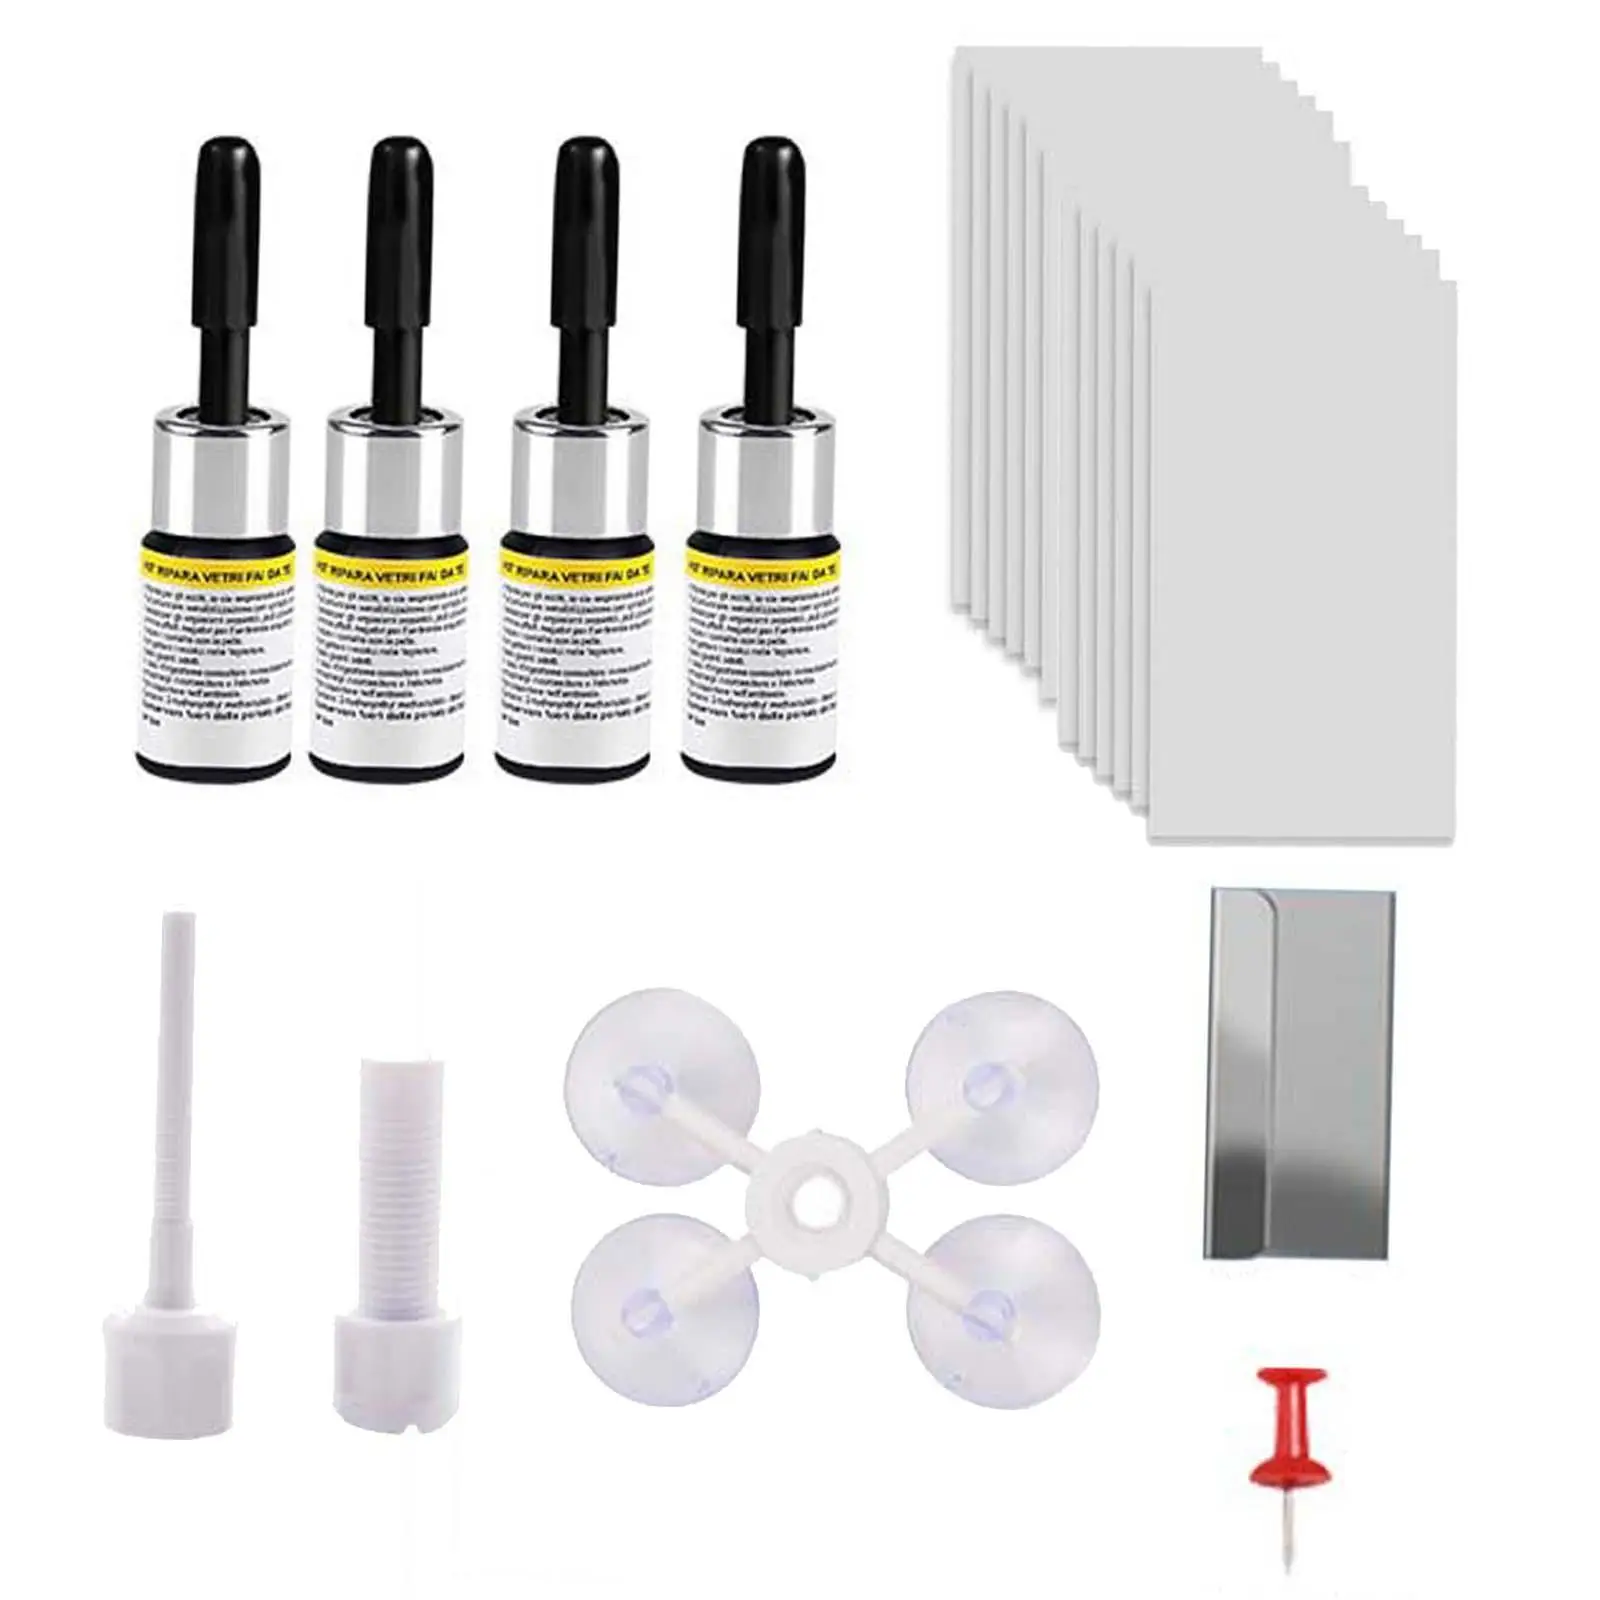 Car Windshield Crack Repair Kit Scratch Remover Easy to Use Automotive Glass